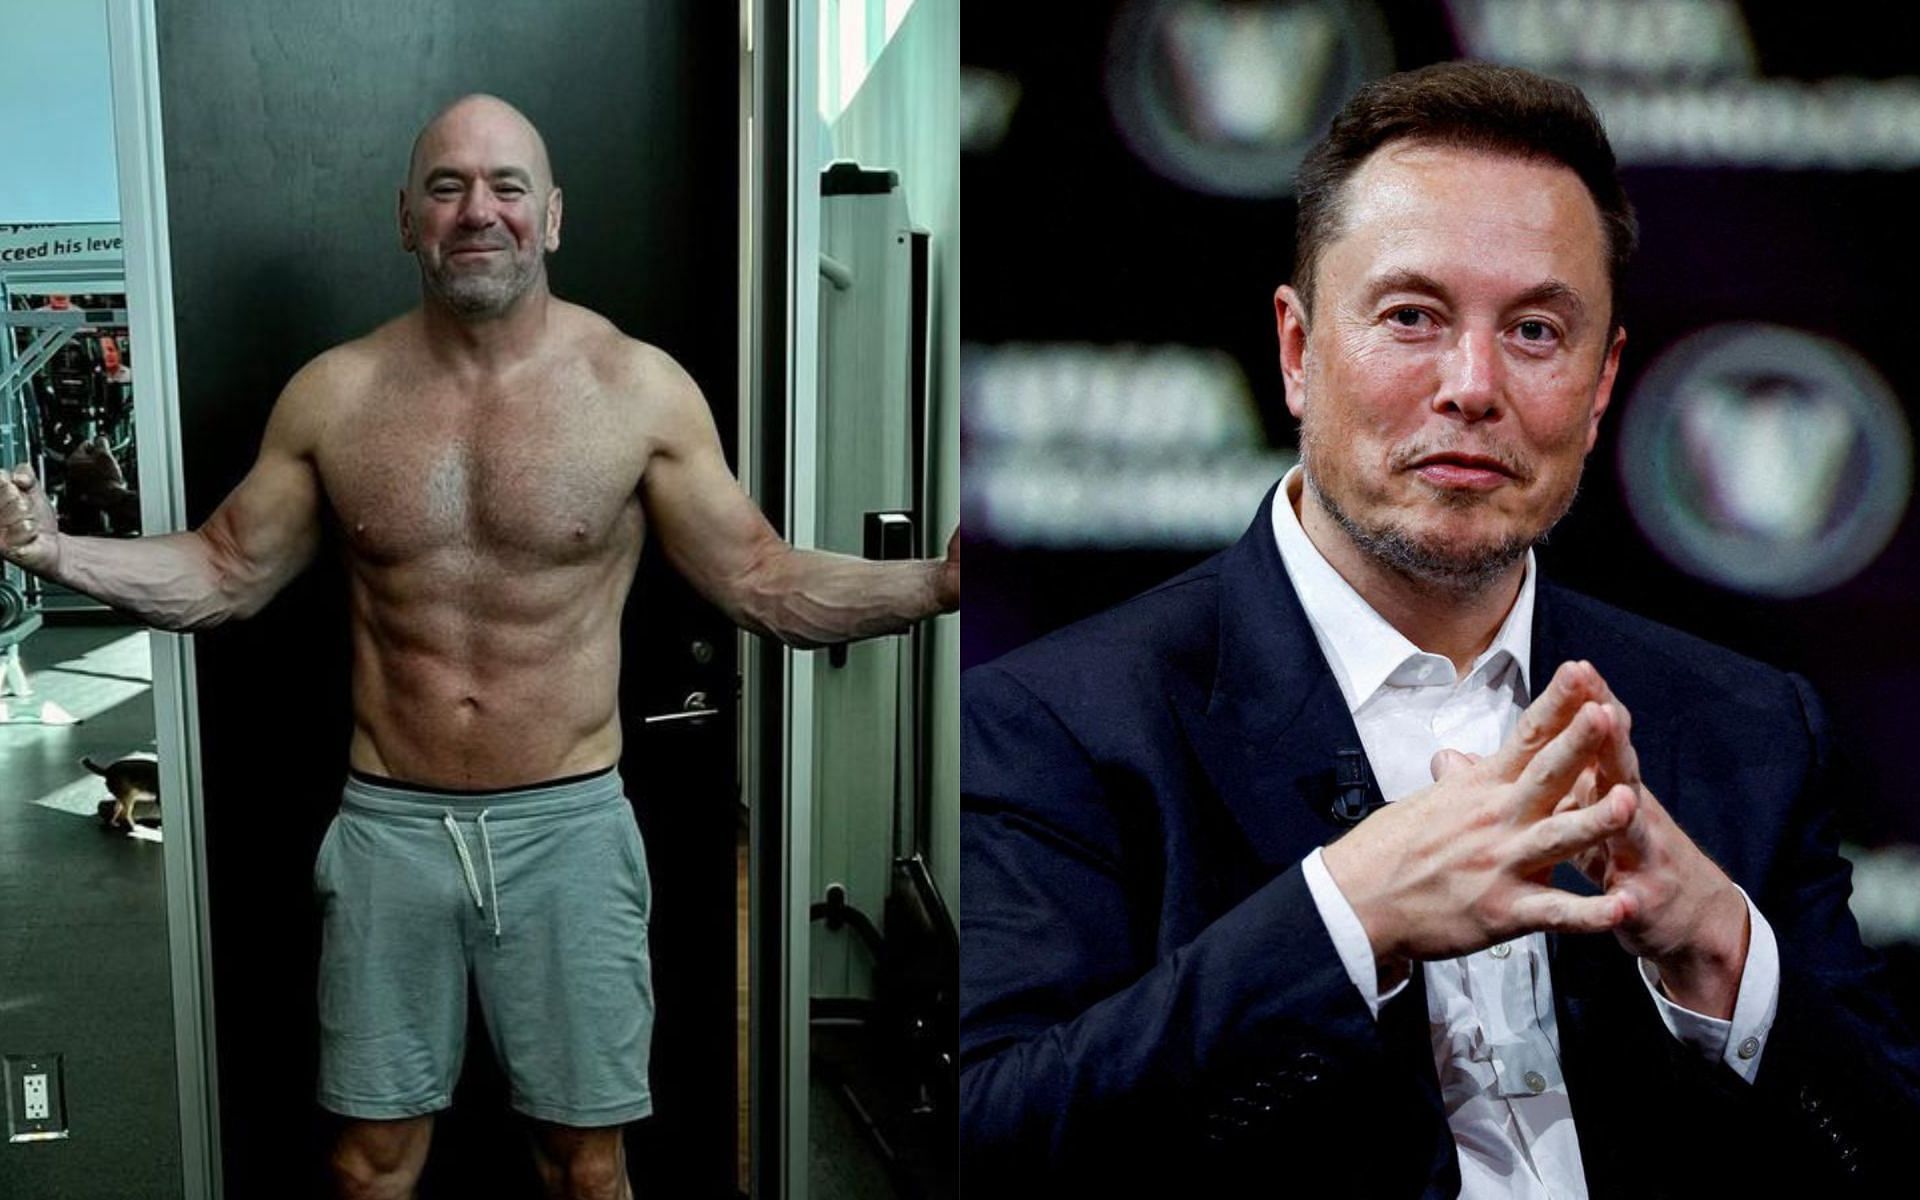 Dana White (left) and Elon Musk (right) (Image credits @danawhite on Instagram and @Travis_in_Flint on X)